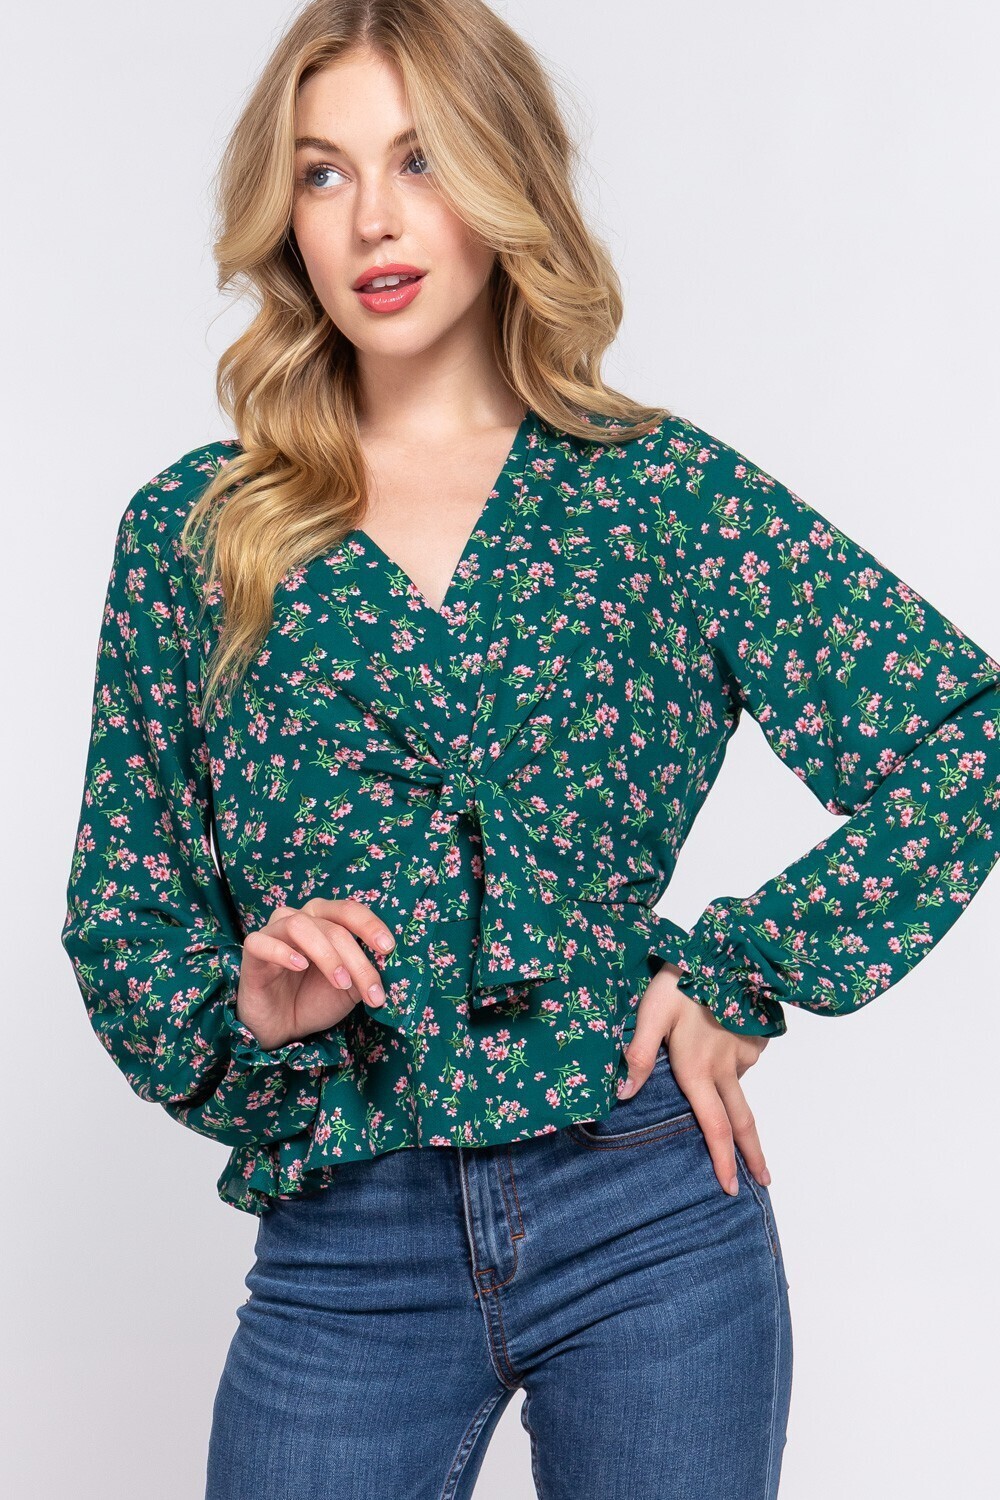 Green Floral Flowy Top